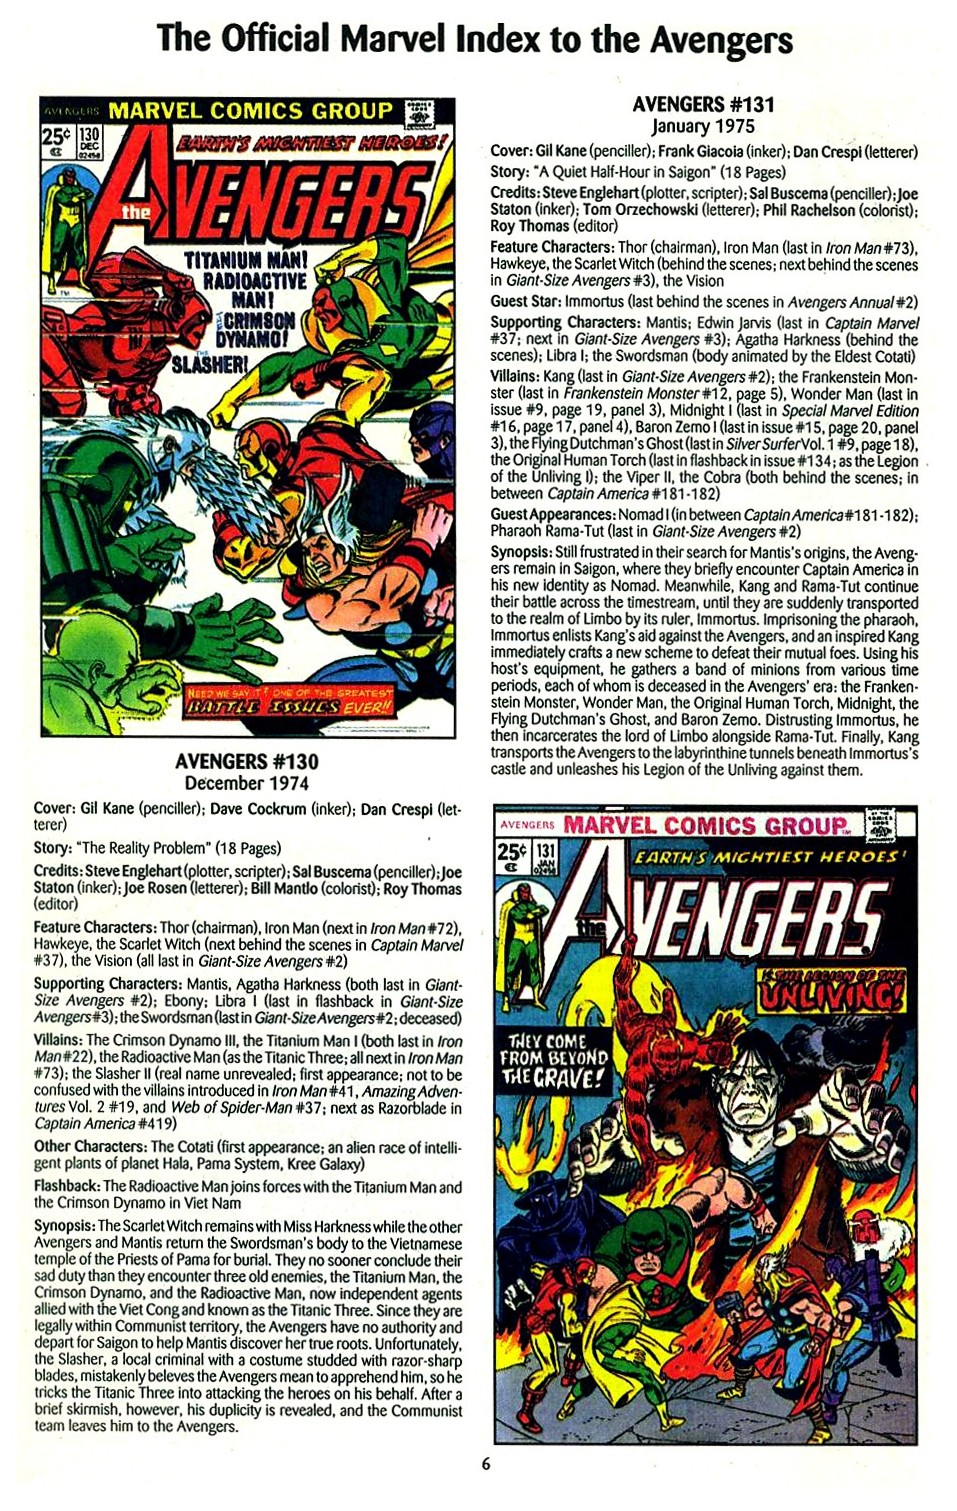 Read online The Official Marvel Index to the Avengers comic -  Issue #3 - 8